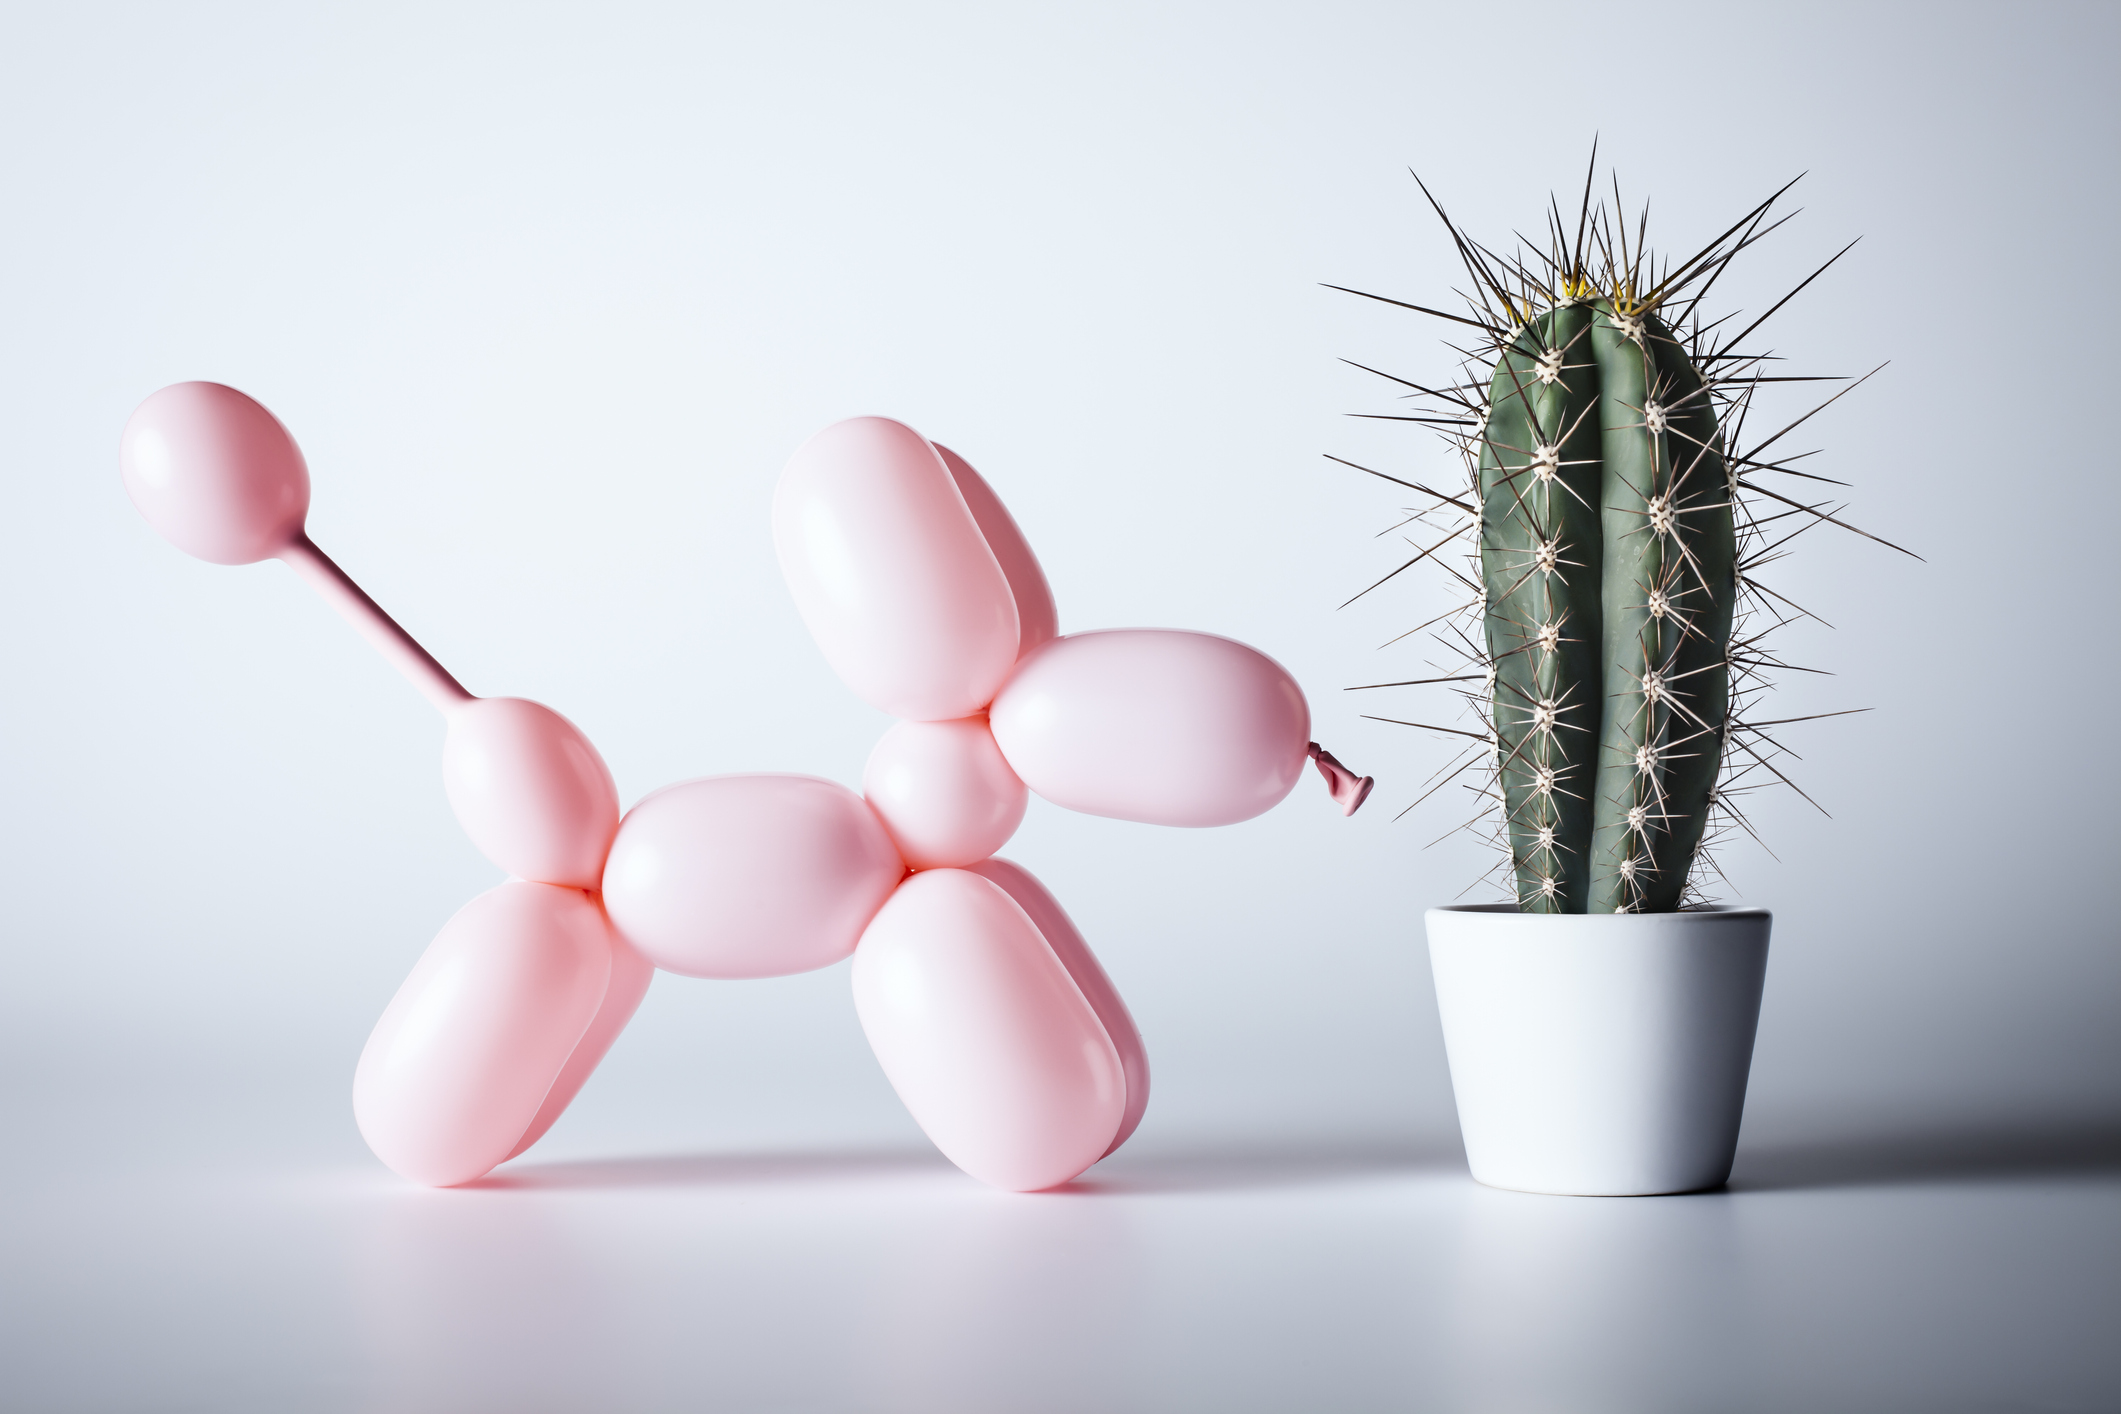 poodle made from a balloon and a cactus;  preparation of business plan for HMRC